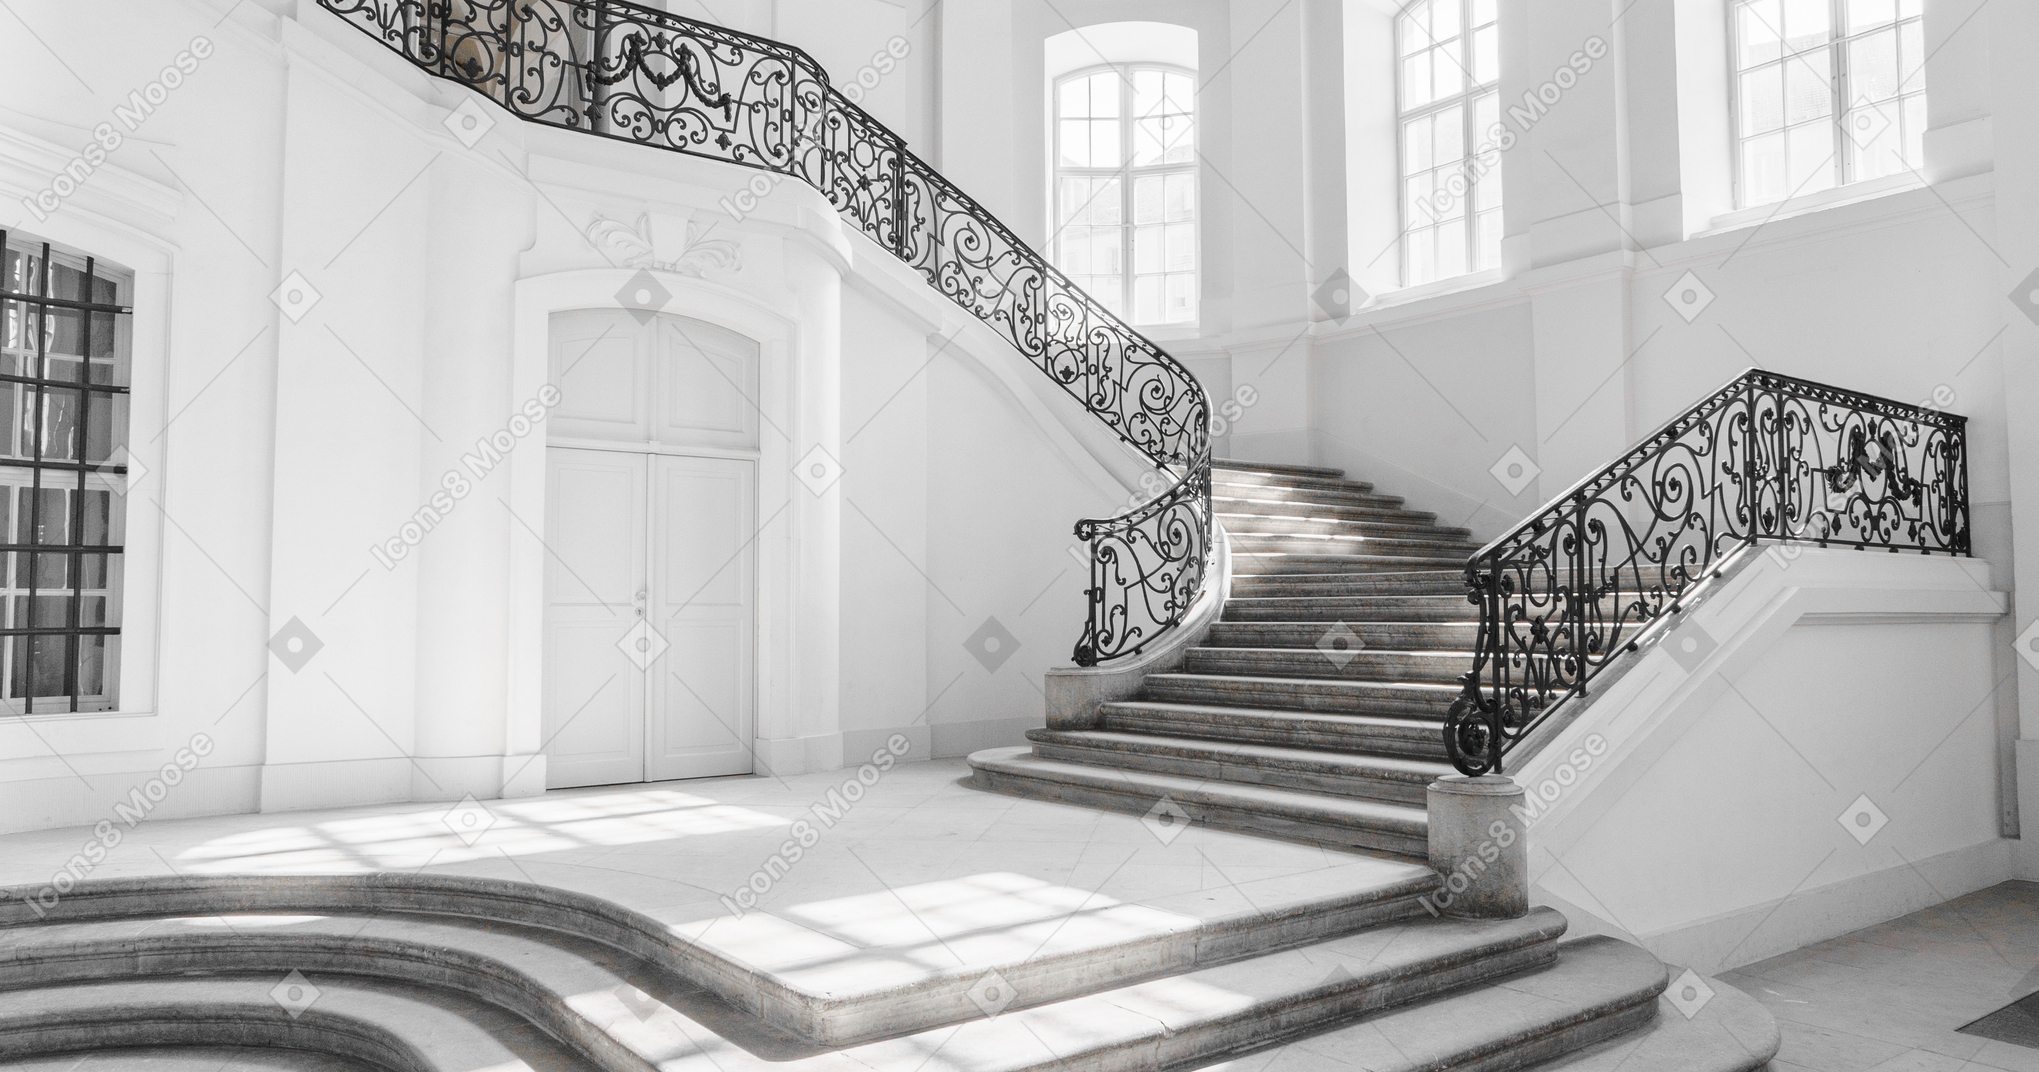 A beautiful empty hall with an openwork staircase and big white windows